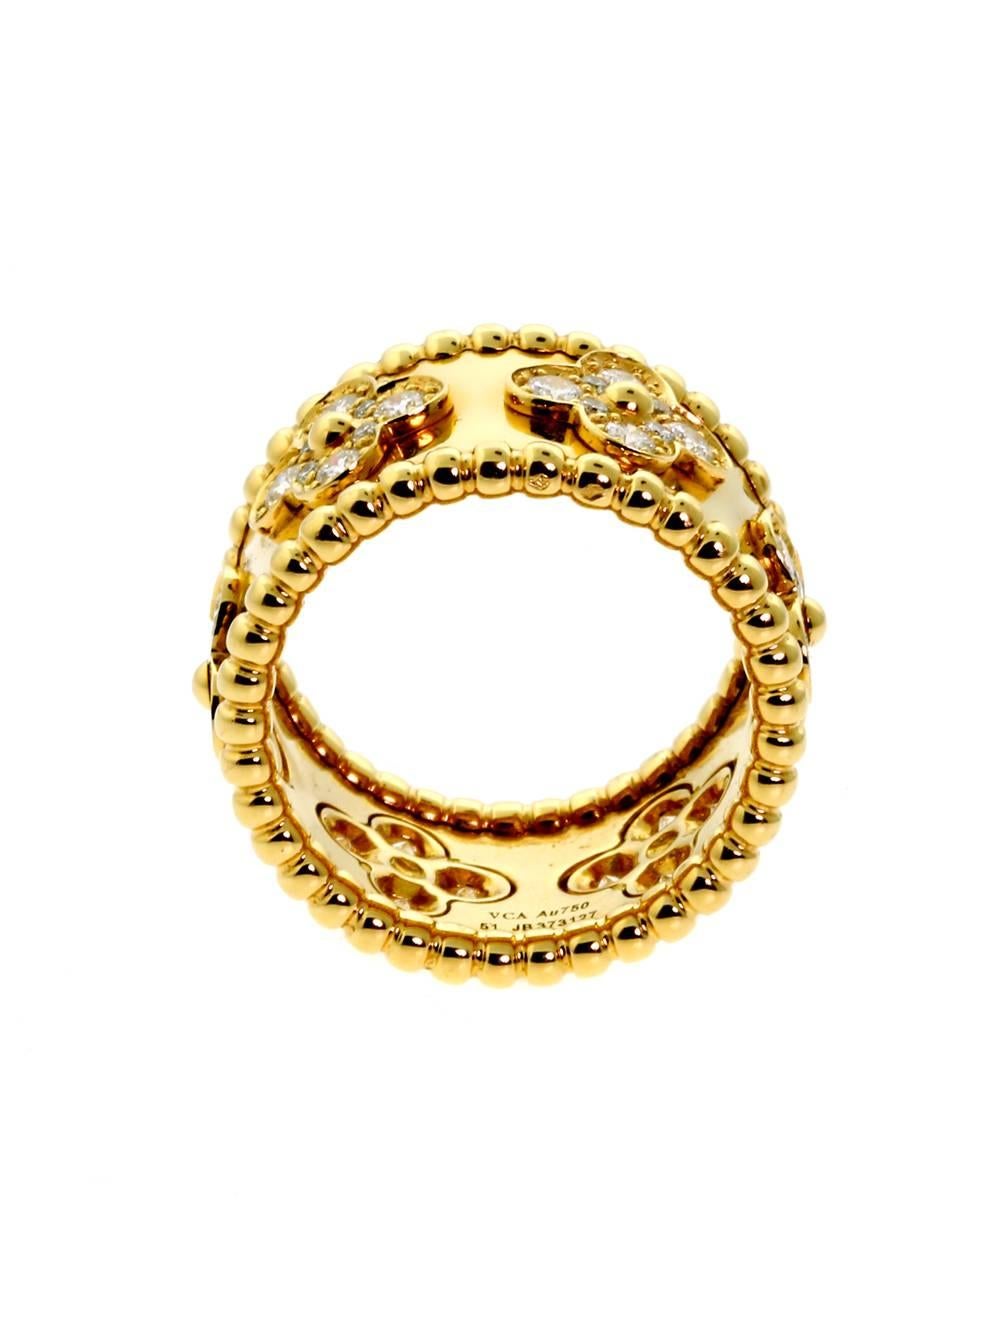 Stately and sophisticated, this yellow gold ring features meticulous craftsmanship. Gold beading encircles the adornment, and its smooth base establishes a solid foundation. The ring’s blend of white diamonds and intricate design elements come